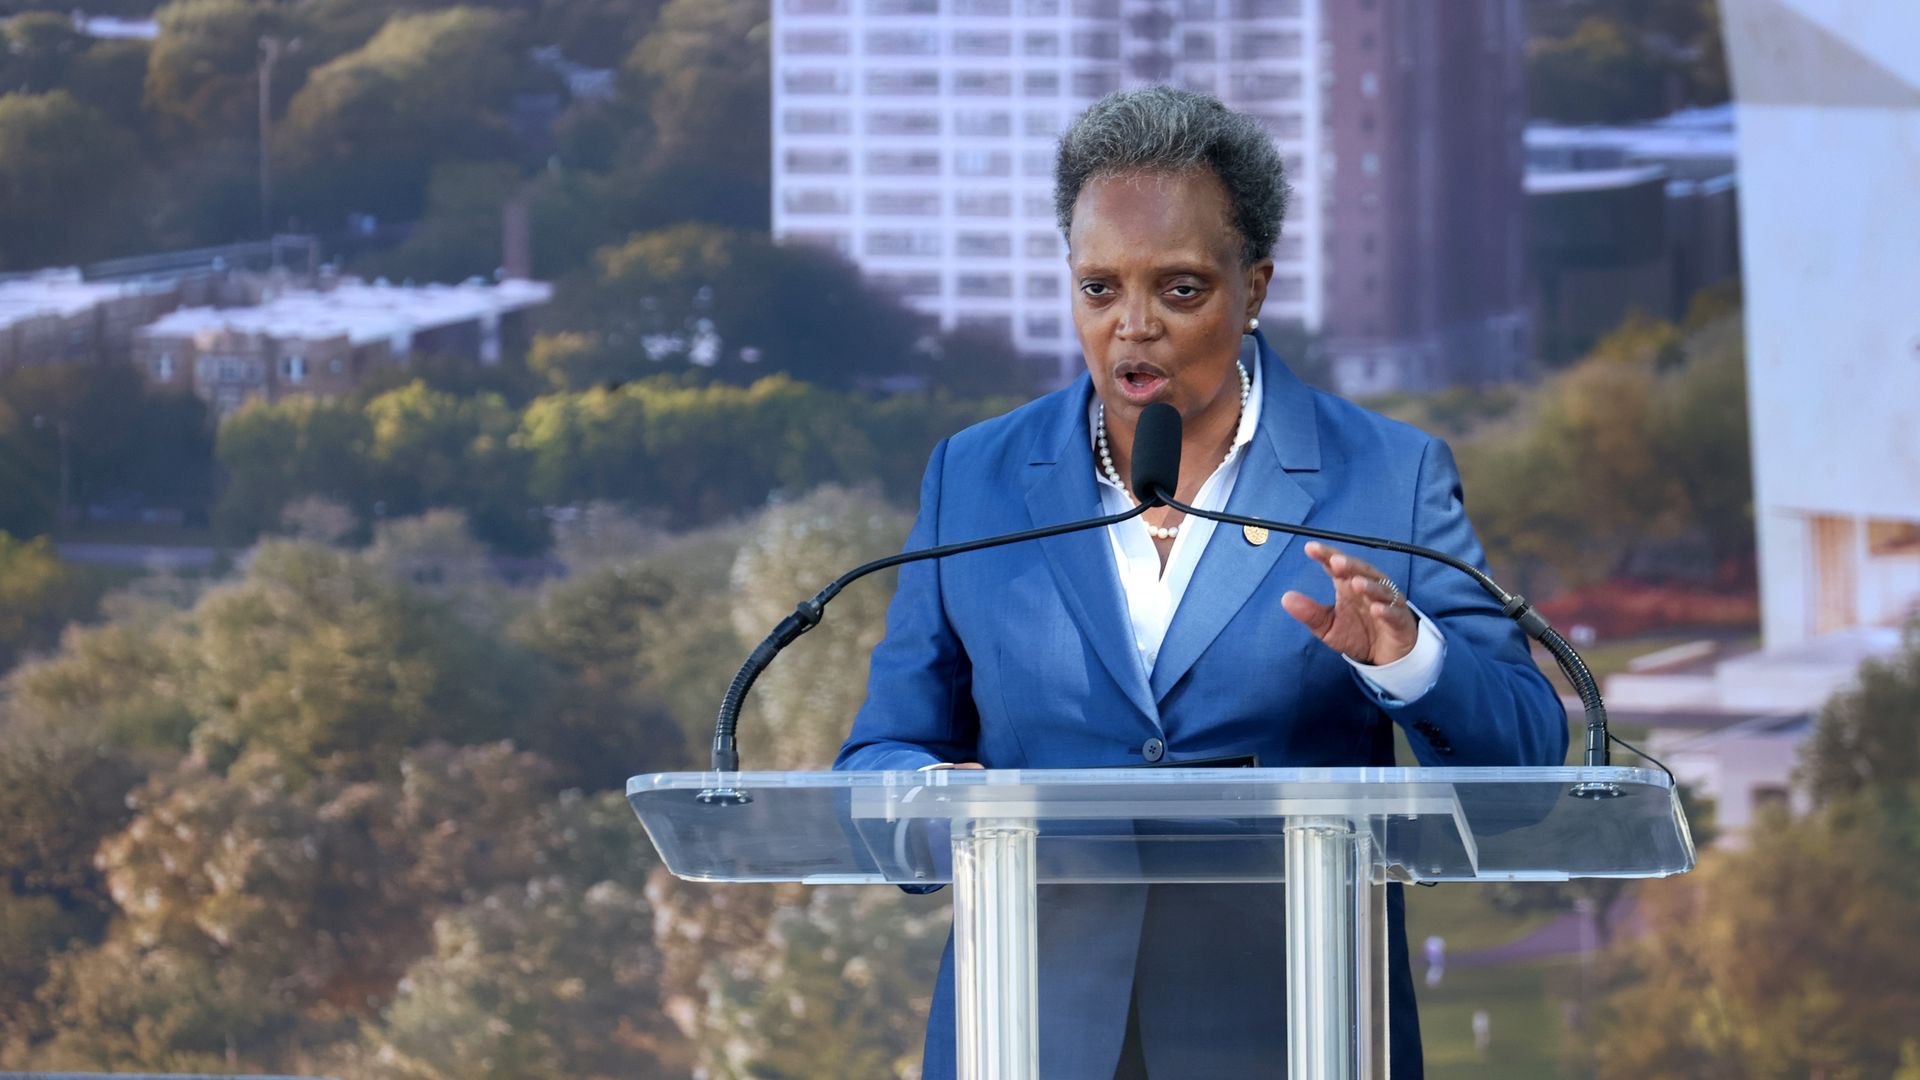 Chicago mayor Lori Lightfoot speaks during a ceremonial groundbreaking at the Obama Presidential Center in Jackson Park on September 28, 2021 in Chicago, Illinois. 